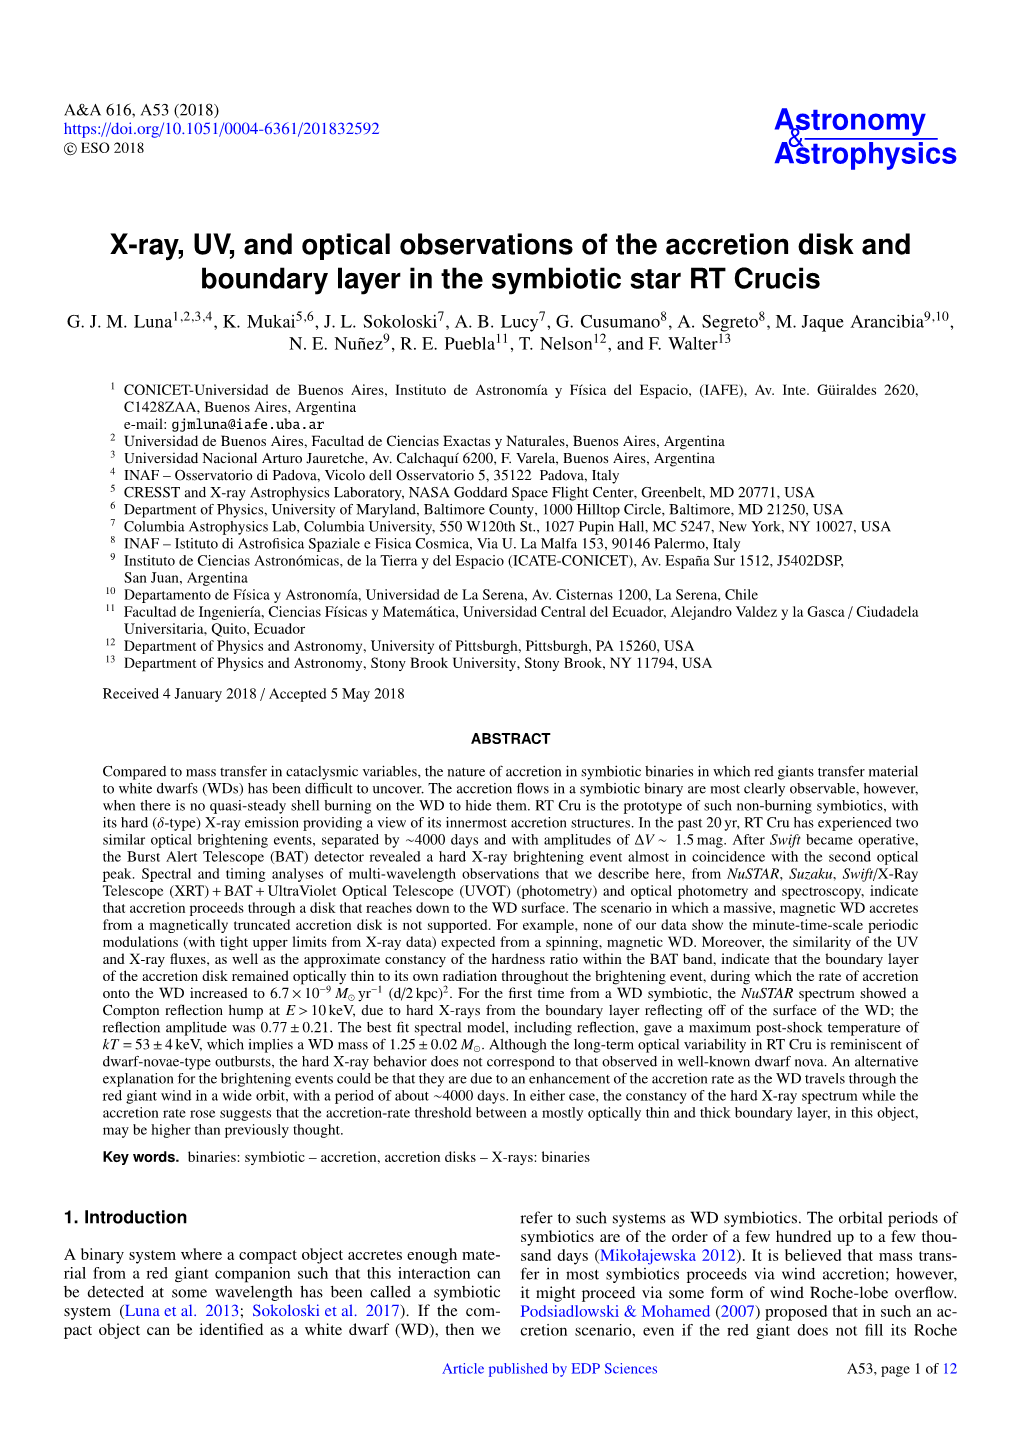 X-Ray, UV, and Optical Observations of the Accretion Disk and Boundary Layer in the Symbiotic Star RT Crucis G